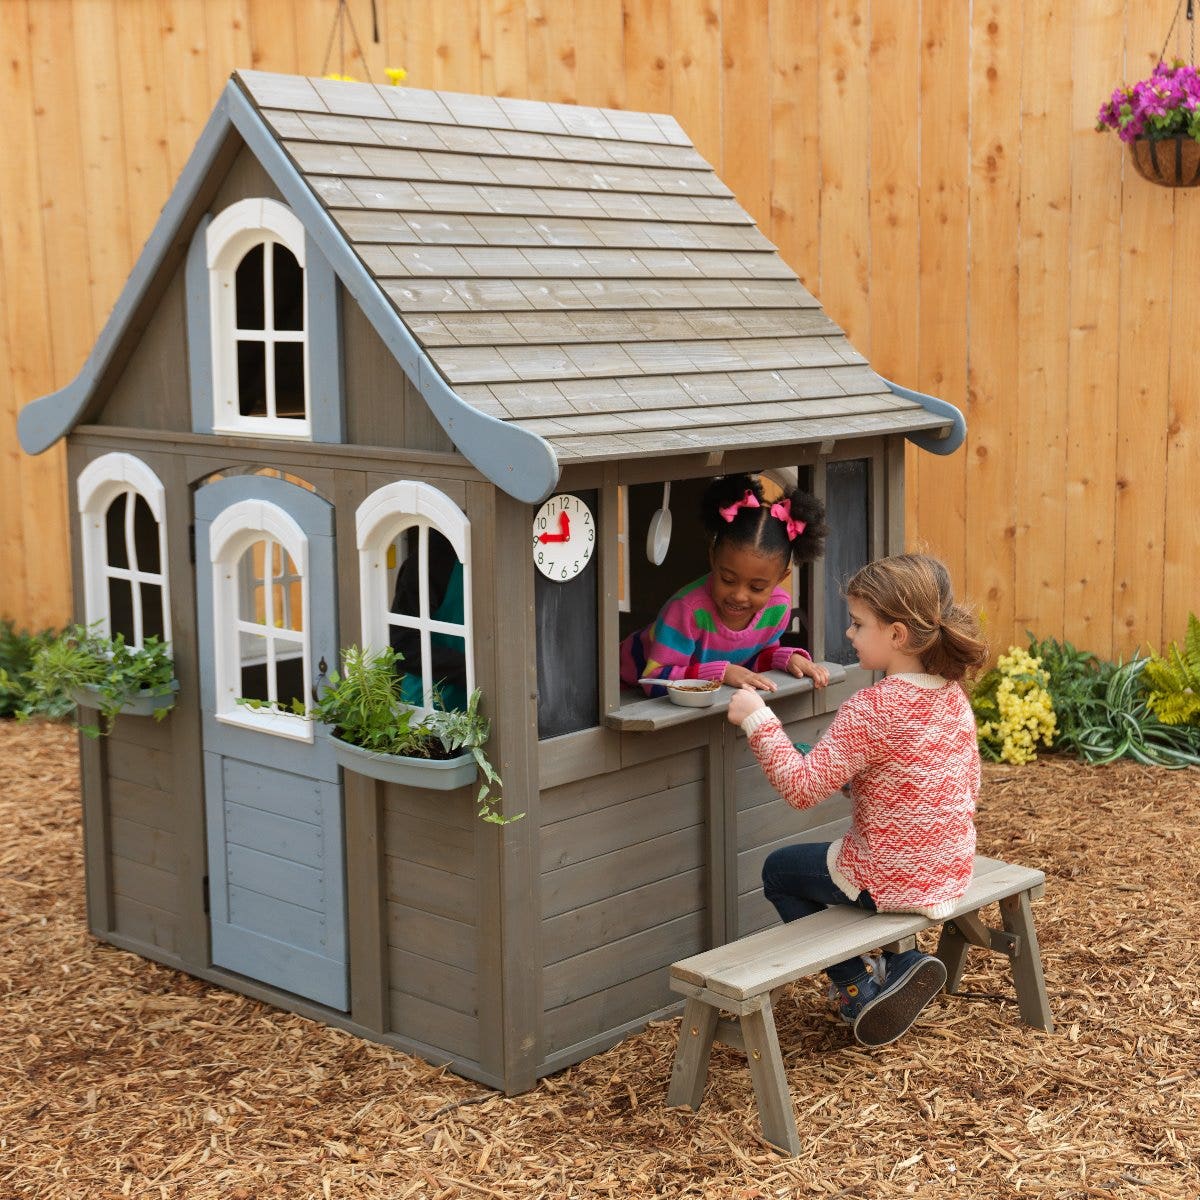 kid playing with KidKraft outdoor playhouse